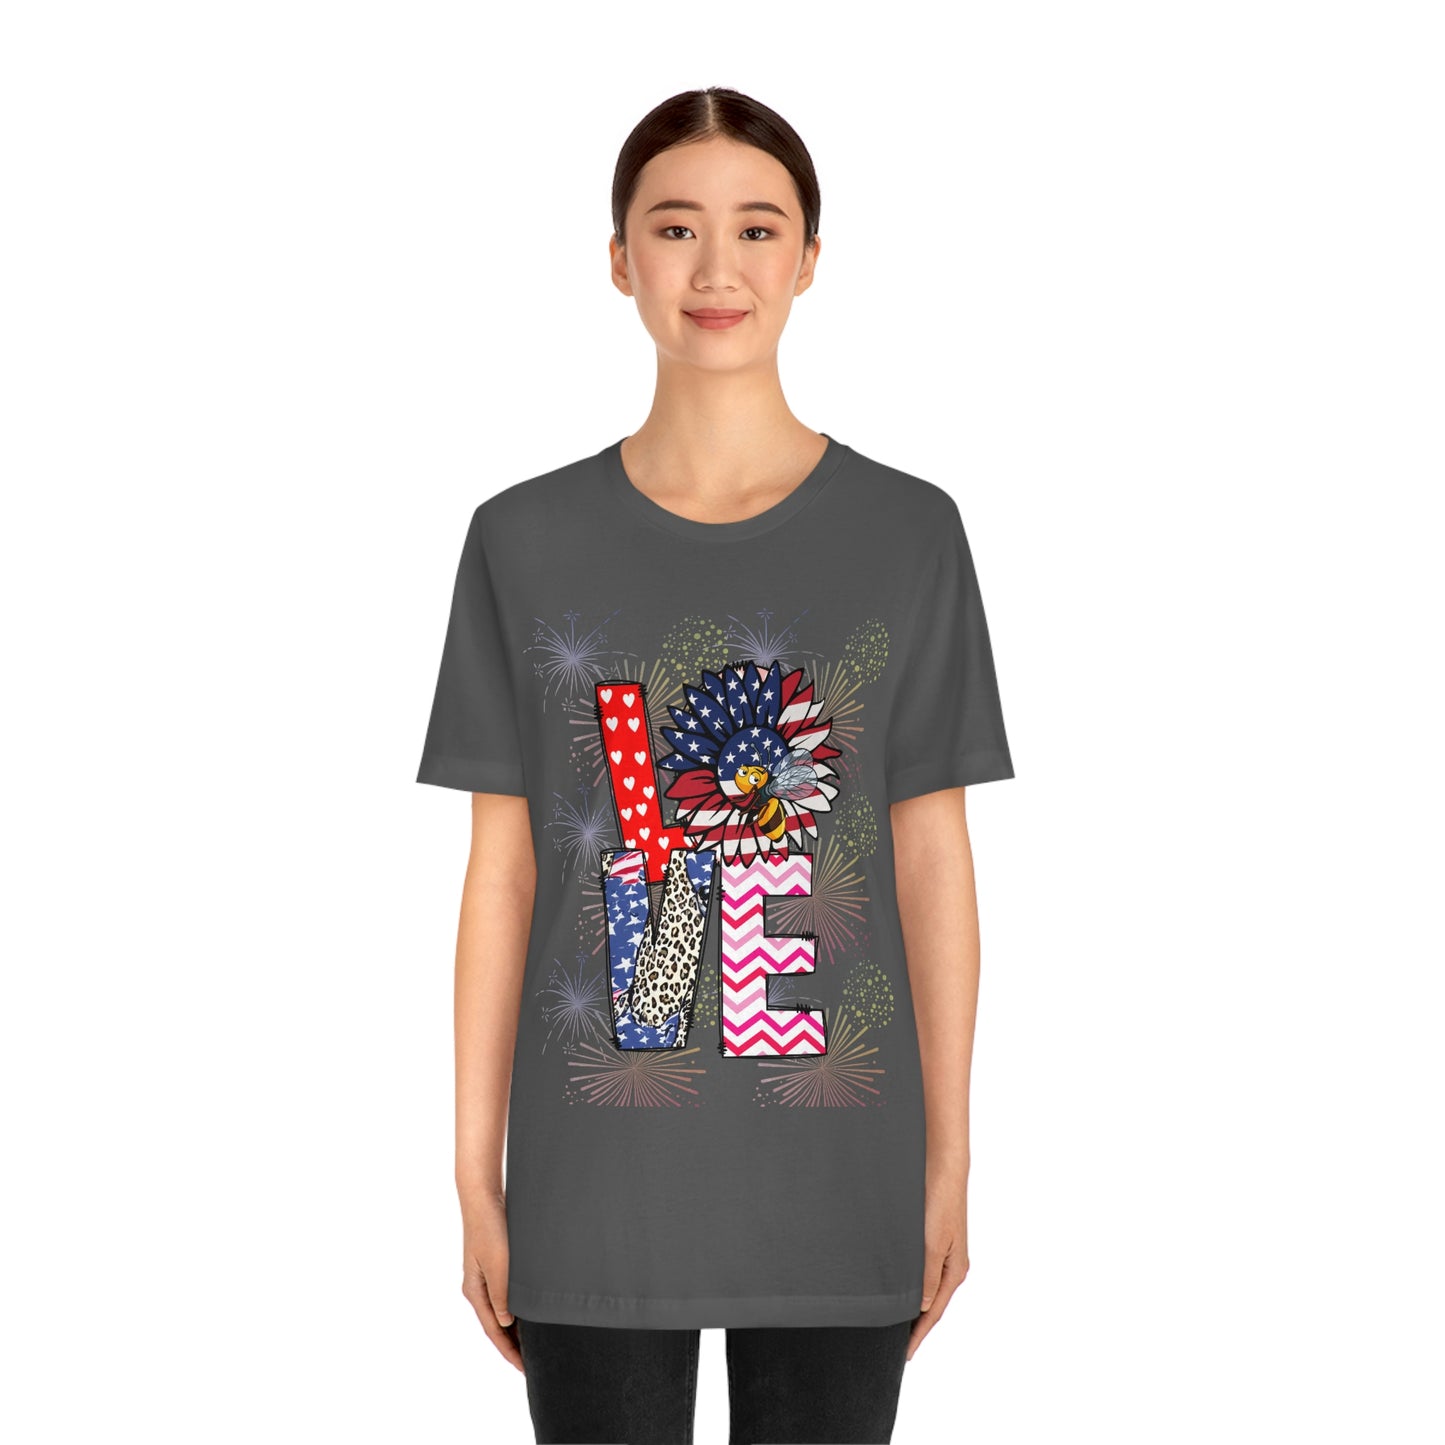 4th of July, America's Day, USA, Short Sleeve Tee